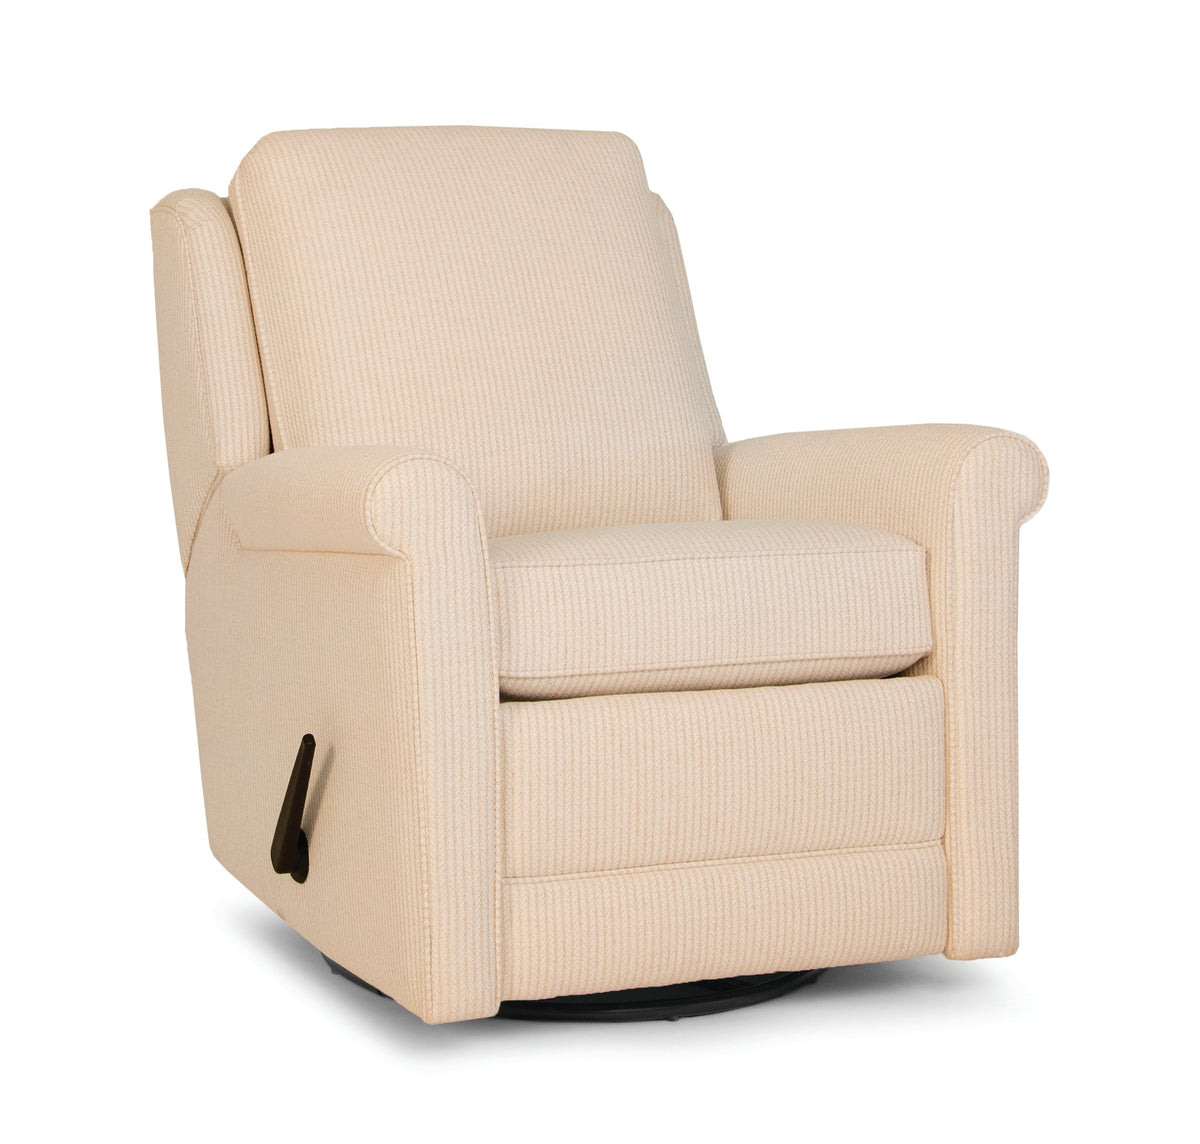 733 Style Swivel Glider Reclining Chair